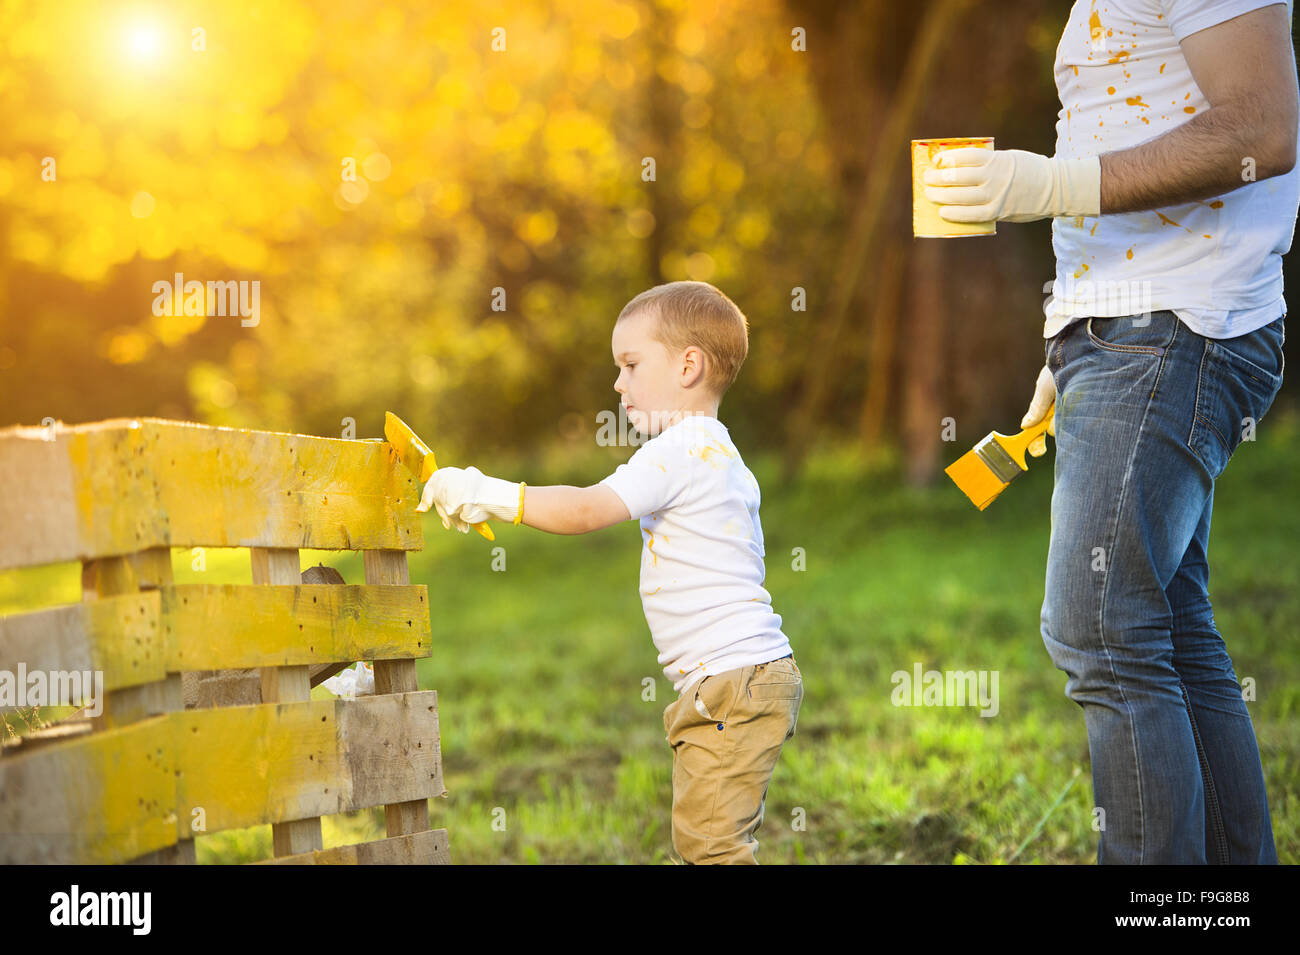 Cute little boy and his father painting wooden fence together on sunny day in nature Stock Photo